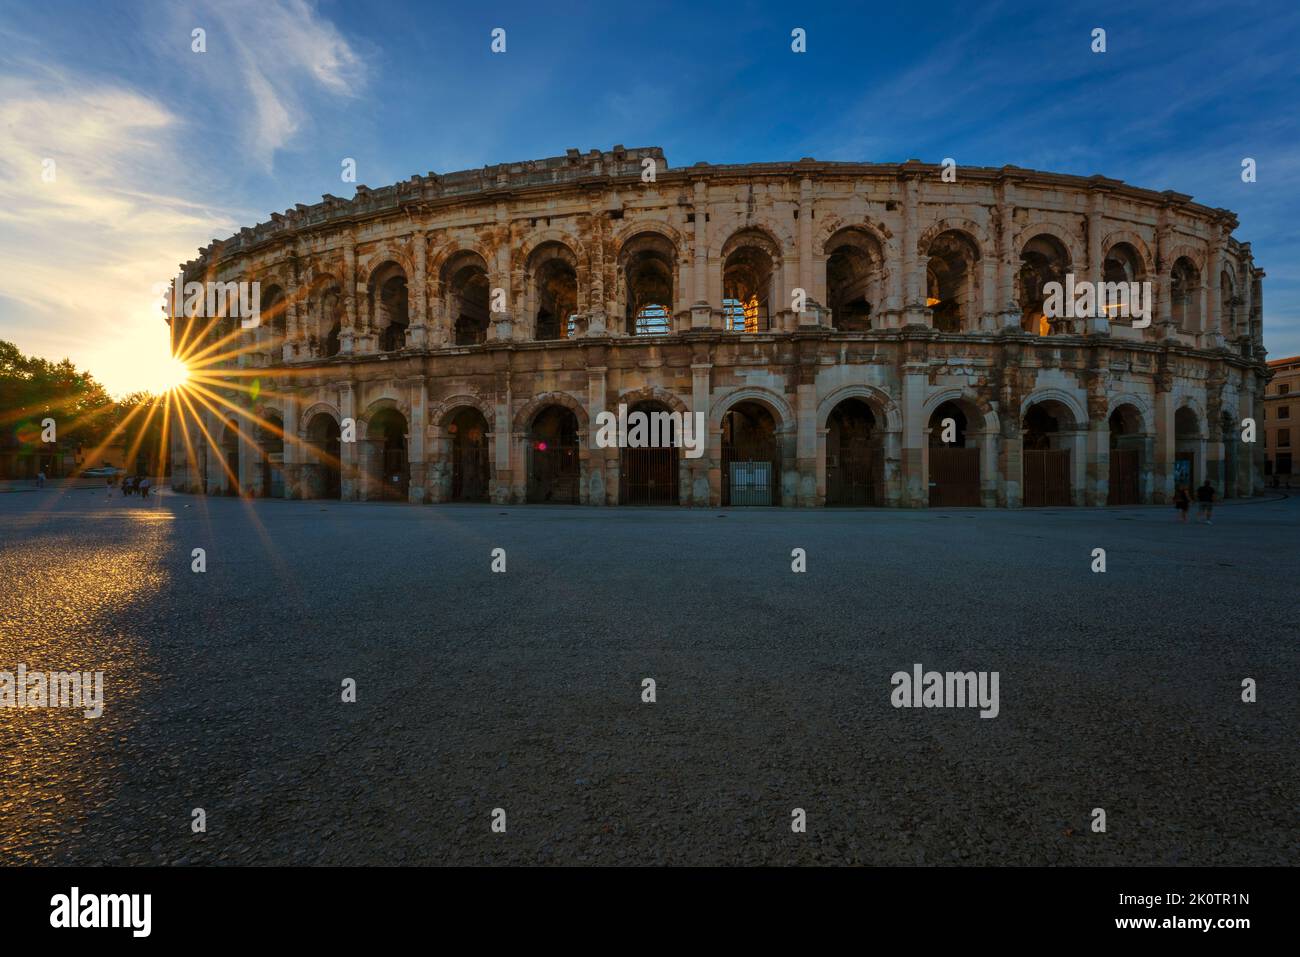 View of famous arena at sunset, Nimes, France Stock Photo